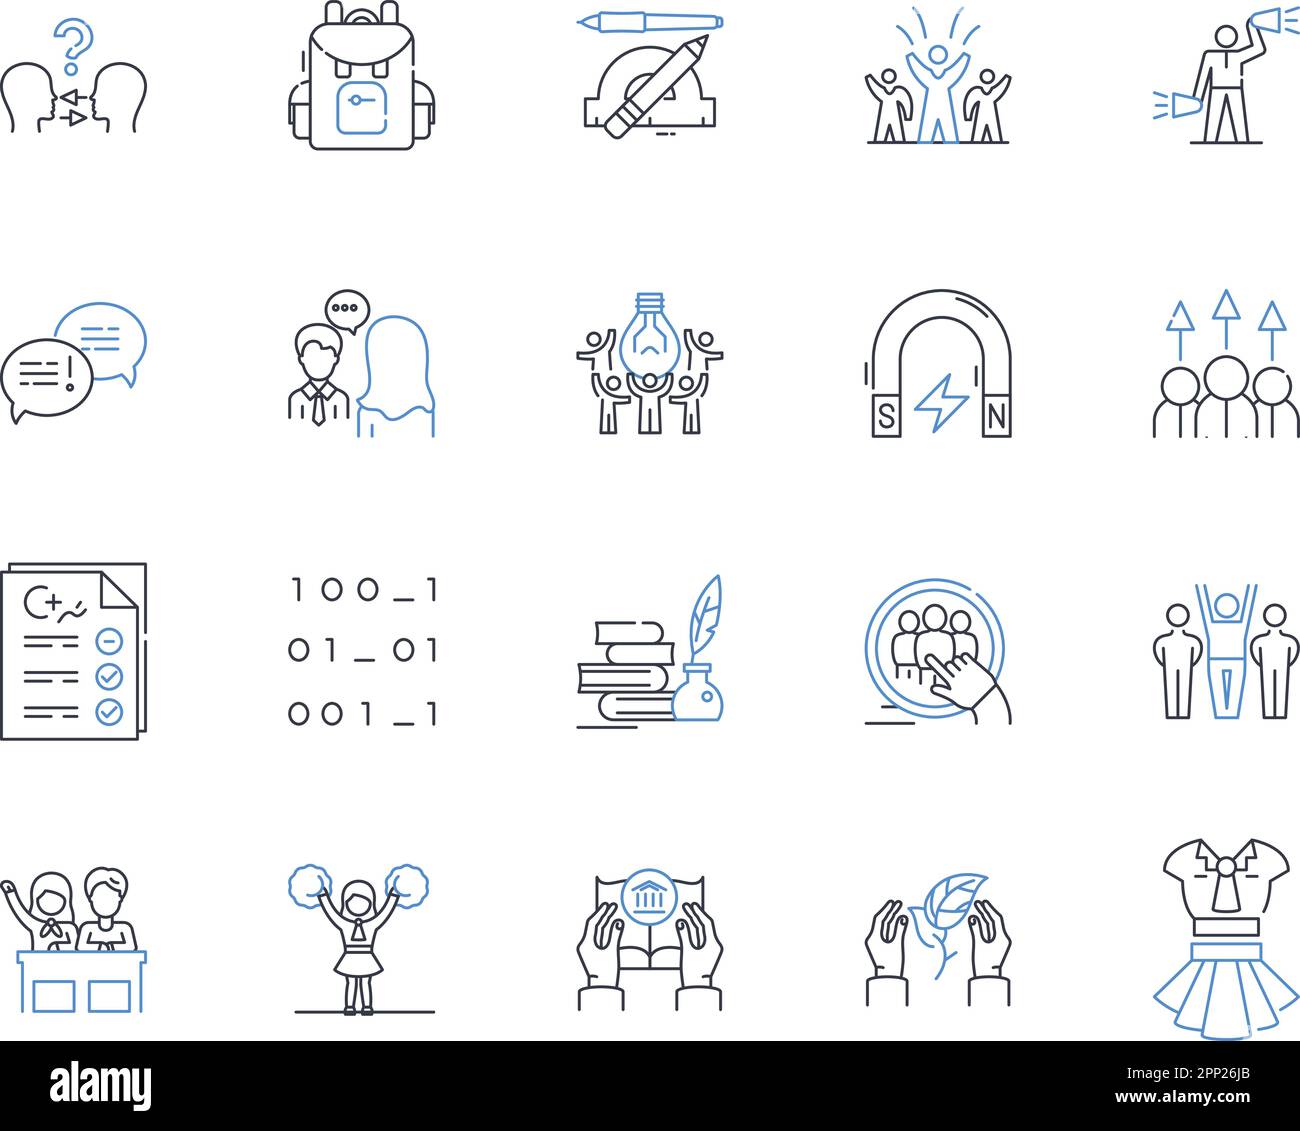 Directing interns line icons collection. Mentorship, Leadership, Communication, Guidance, Professionalism, Coaching, Delegation vector and linear Stock Vector